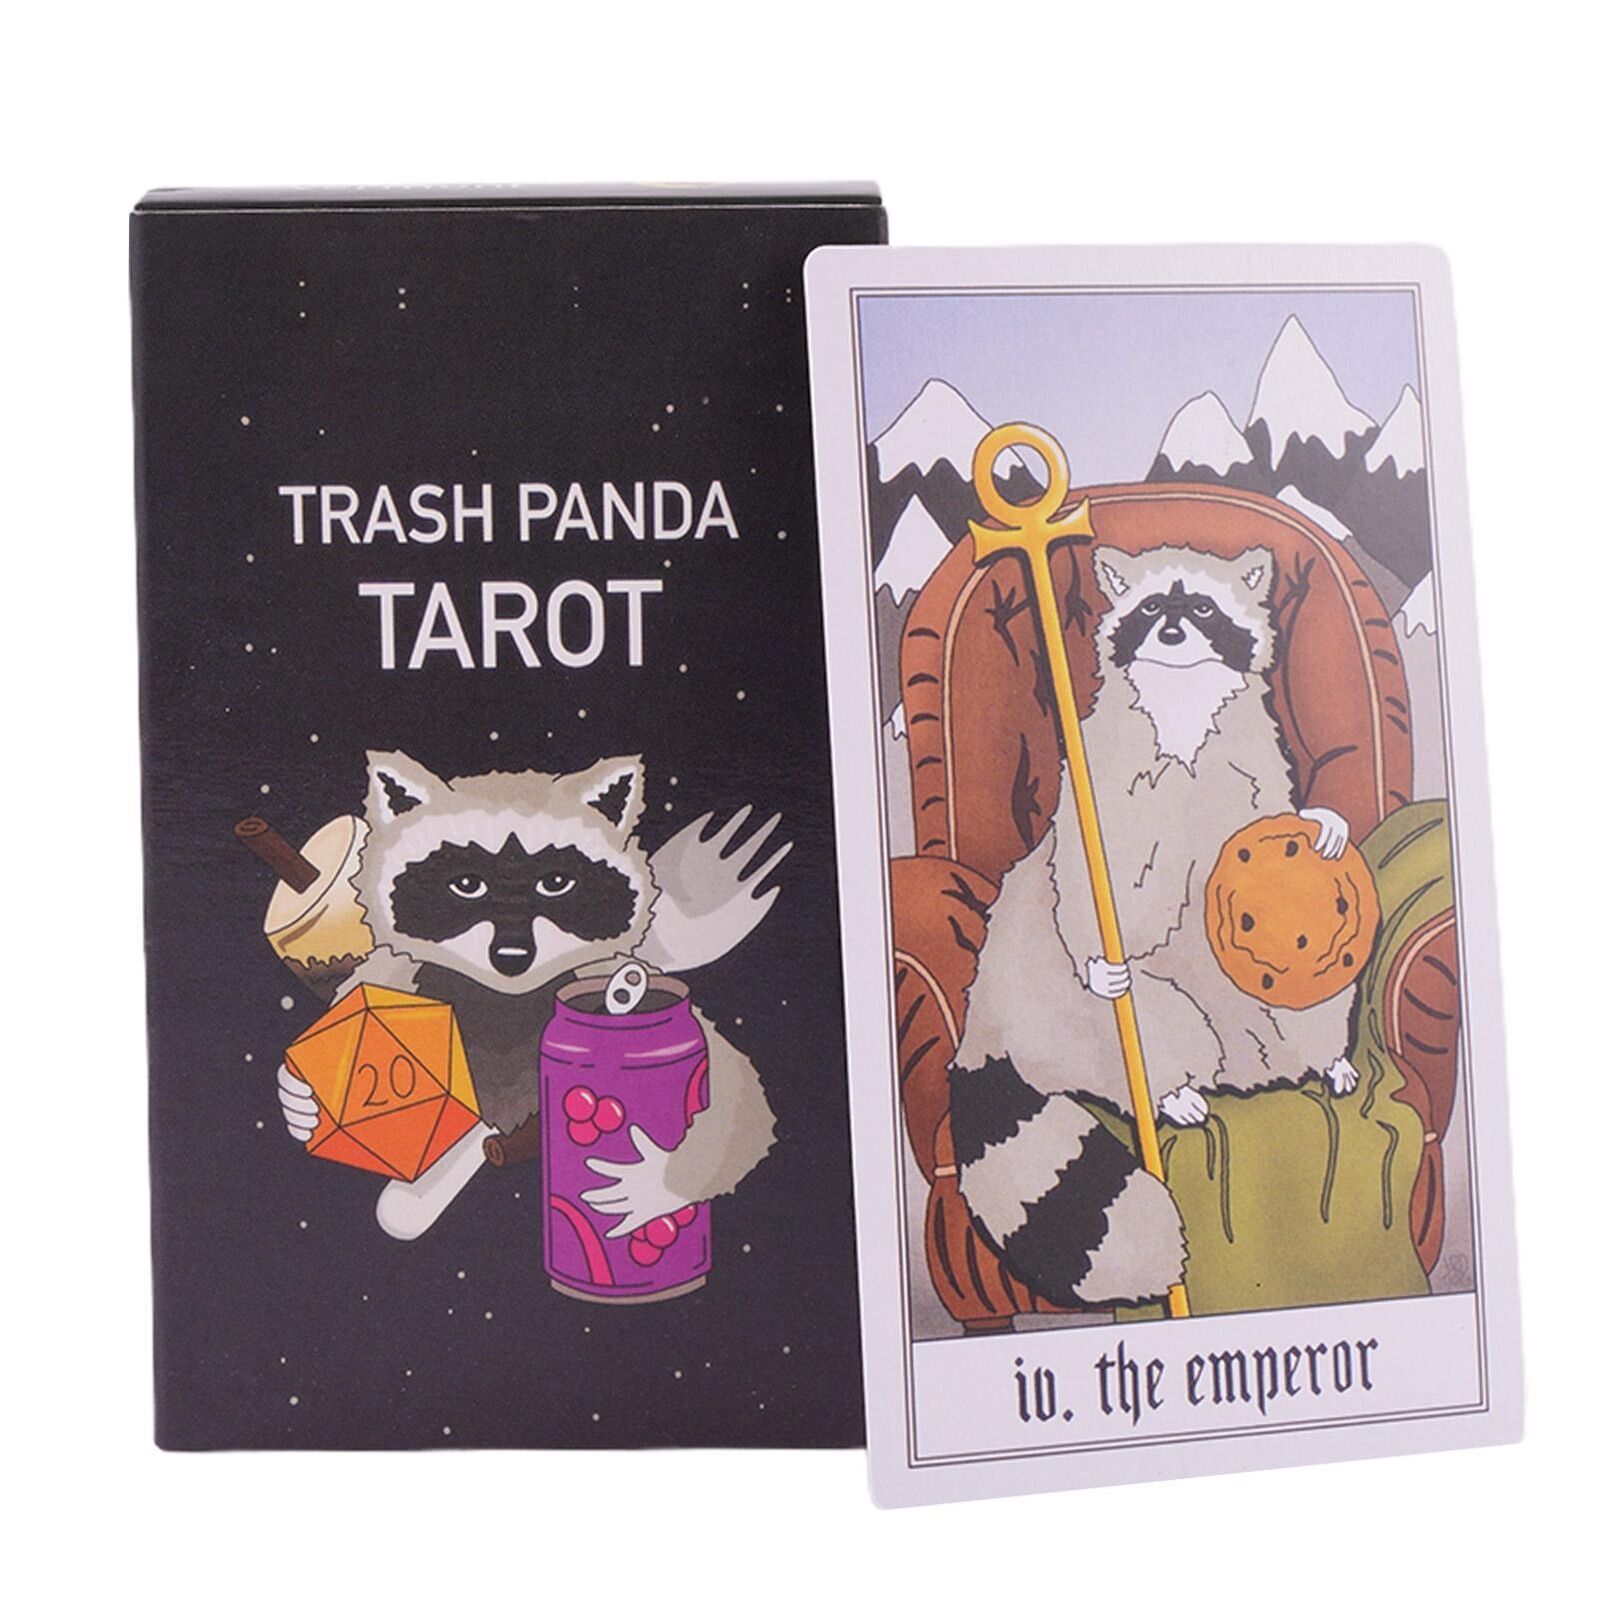 Trash Panda Tarot Cards English Version Cards for Beginners Table Board Games